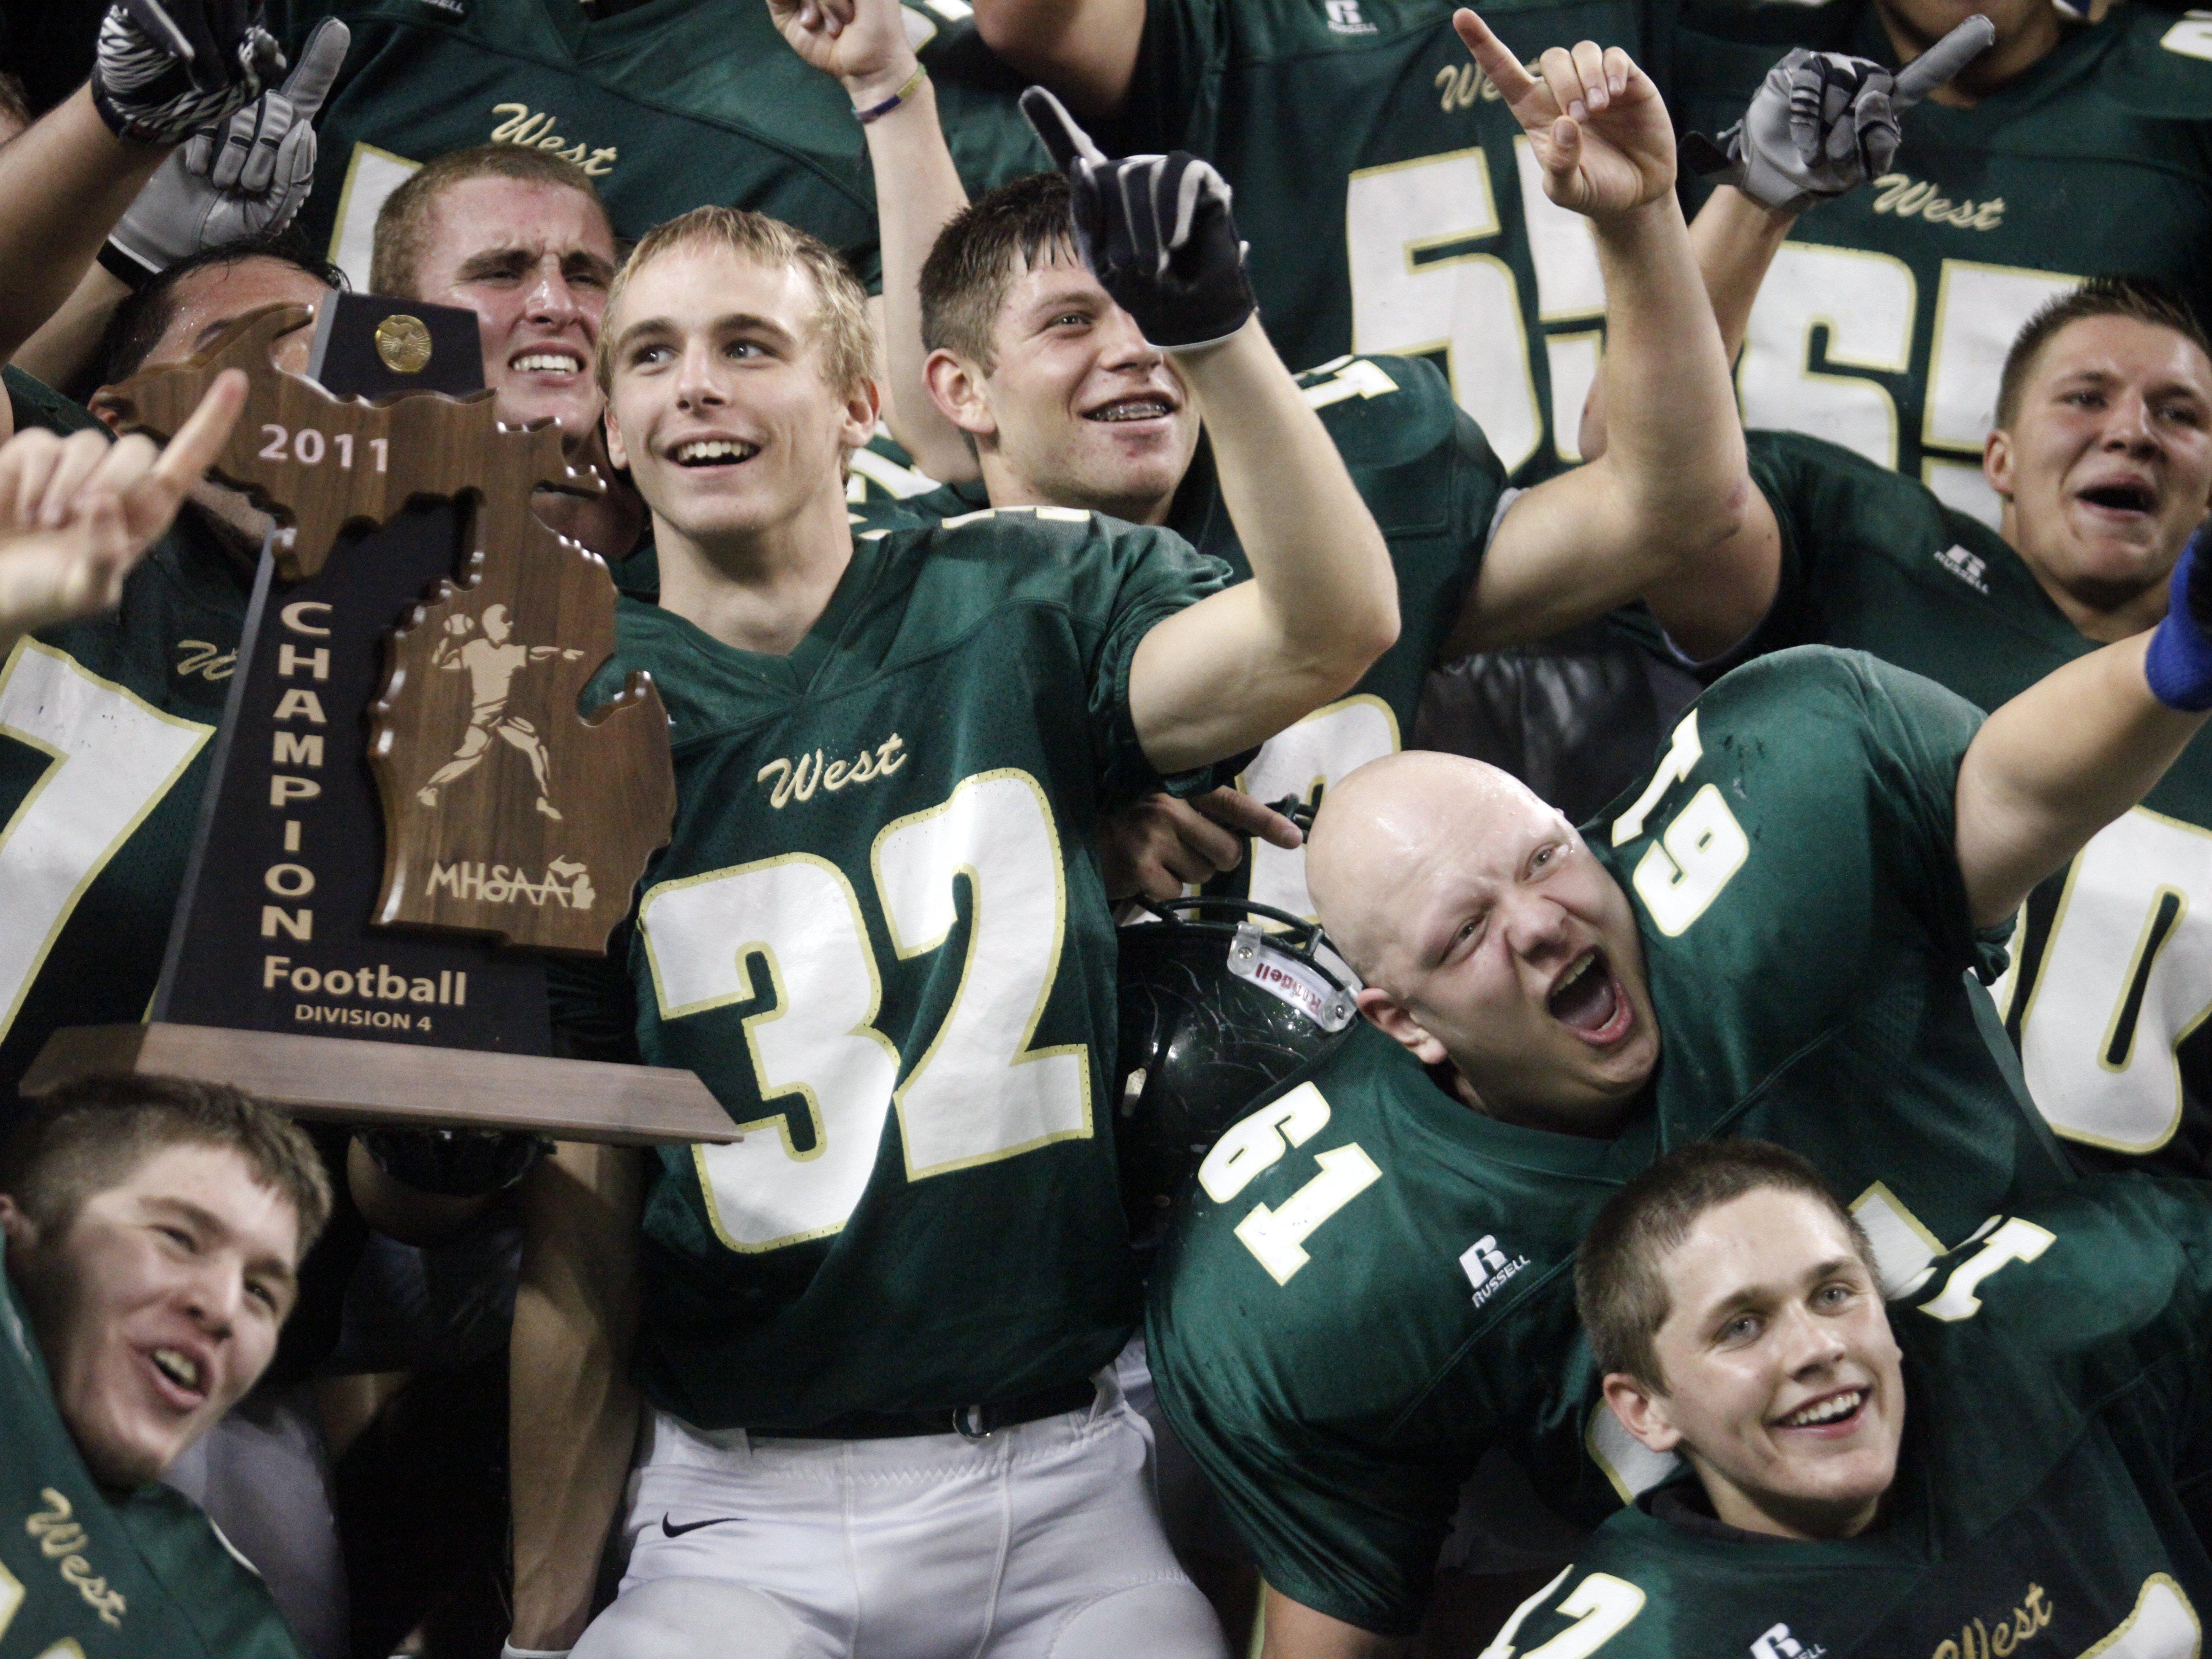 Zeeland West players celebrate their win on Friday, November 25, 2011 during the Michigan High School Football Division 4 Championship game at Ford Field. Zeeland West wins their last game of their perfect season against Marine City 45-7. JARRAD HENDERSON/Detroit Free Press